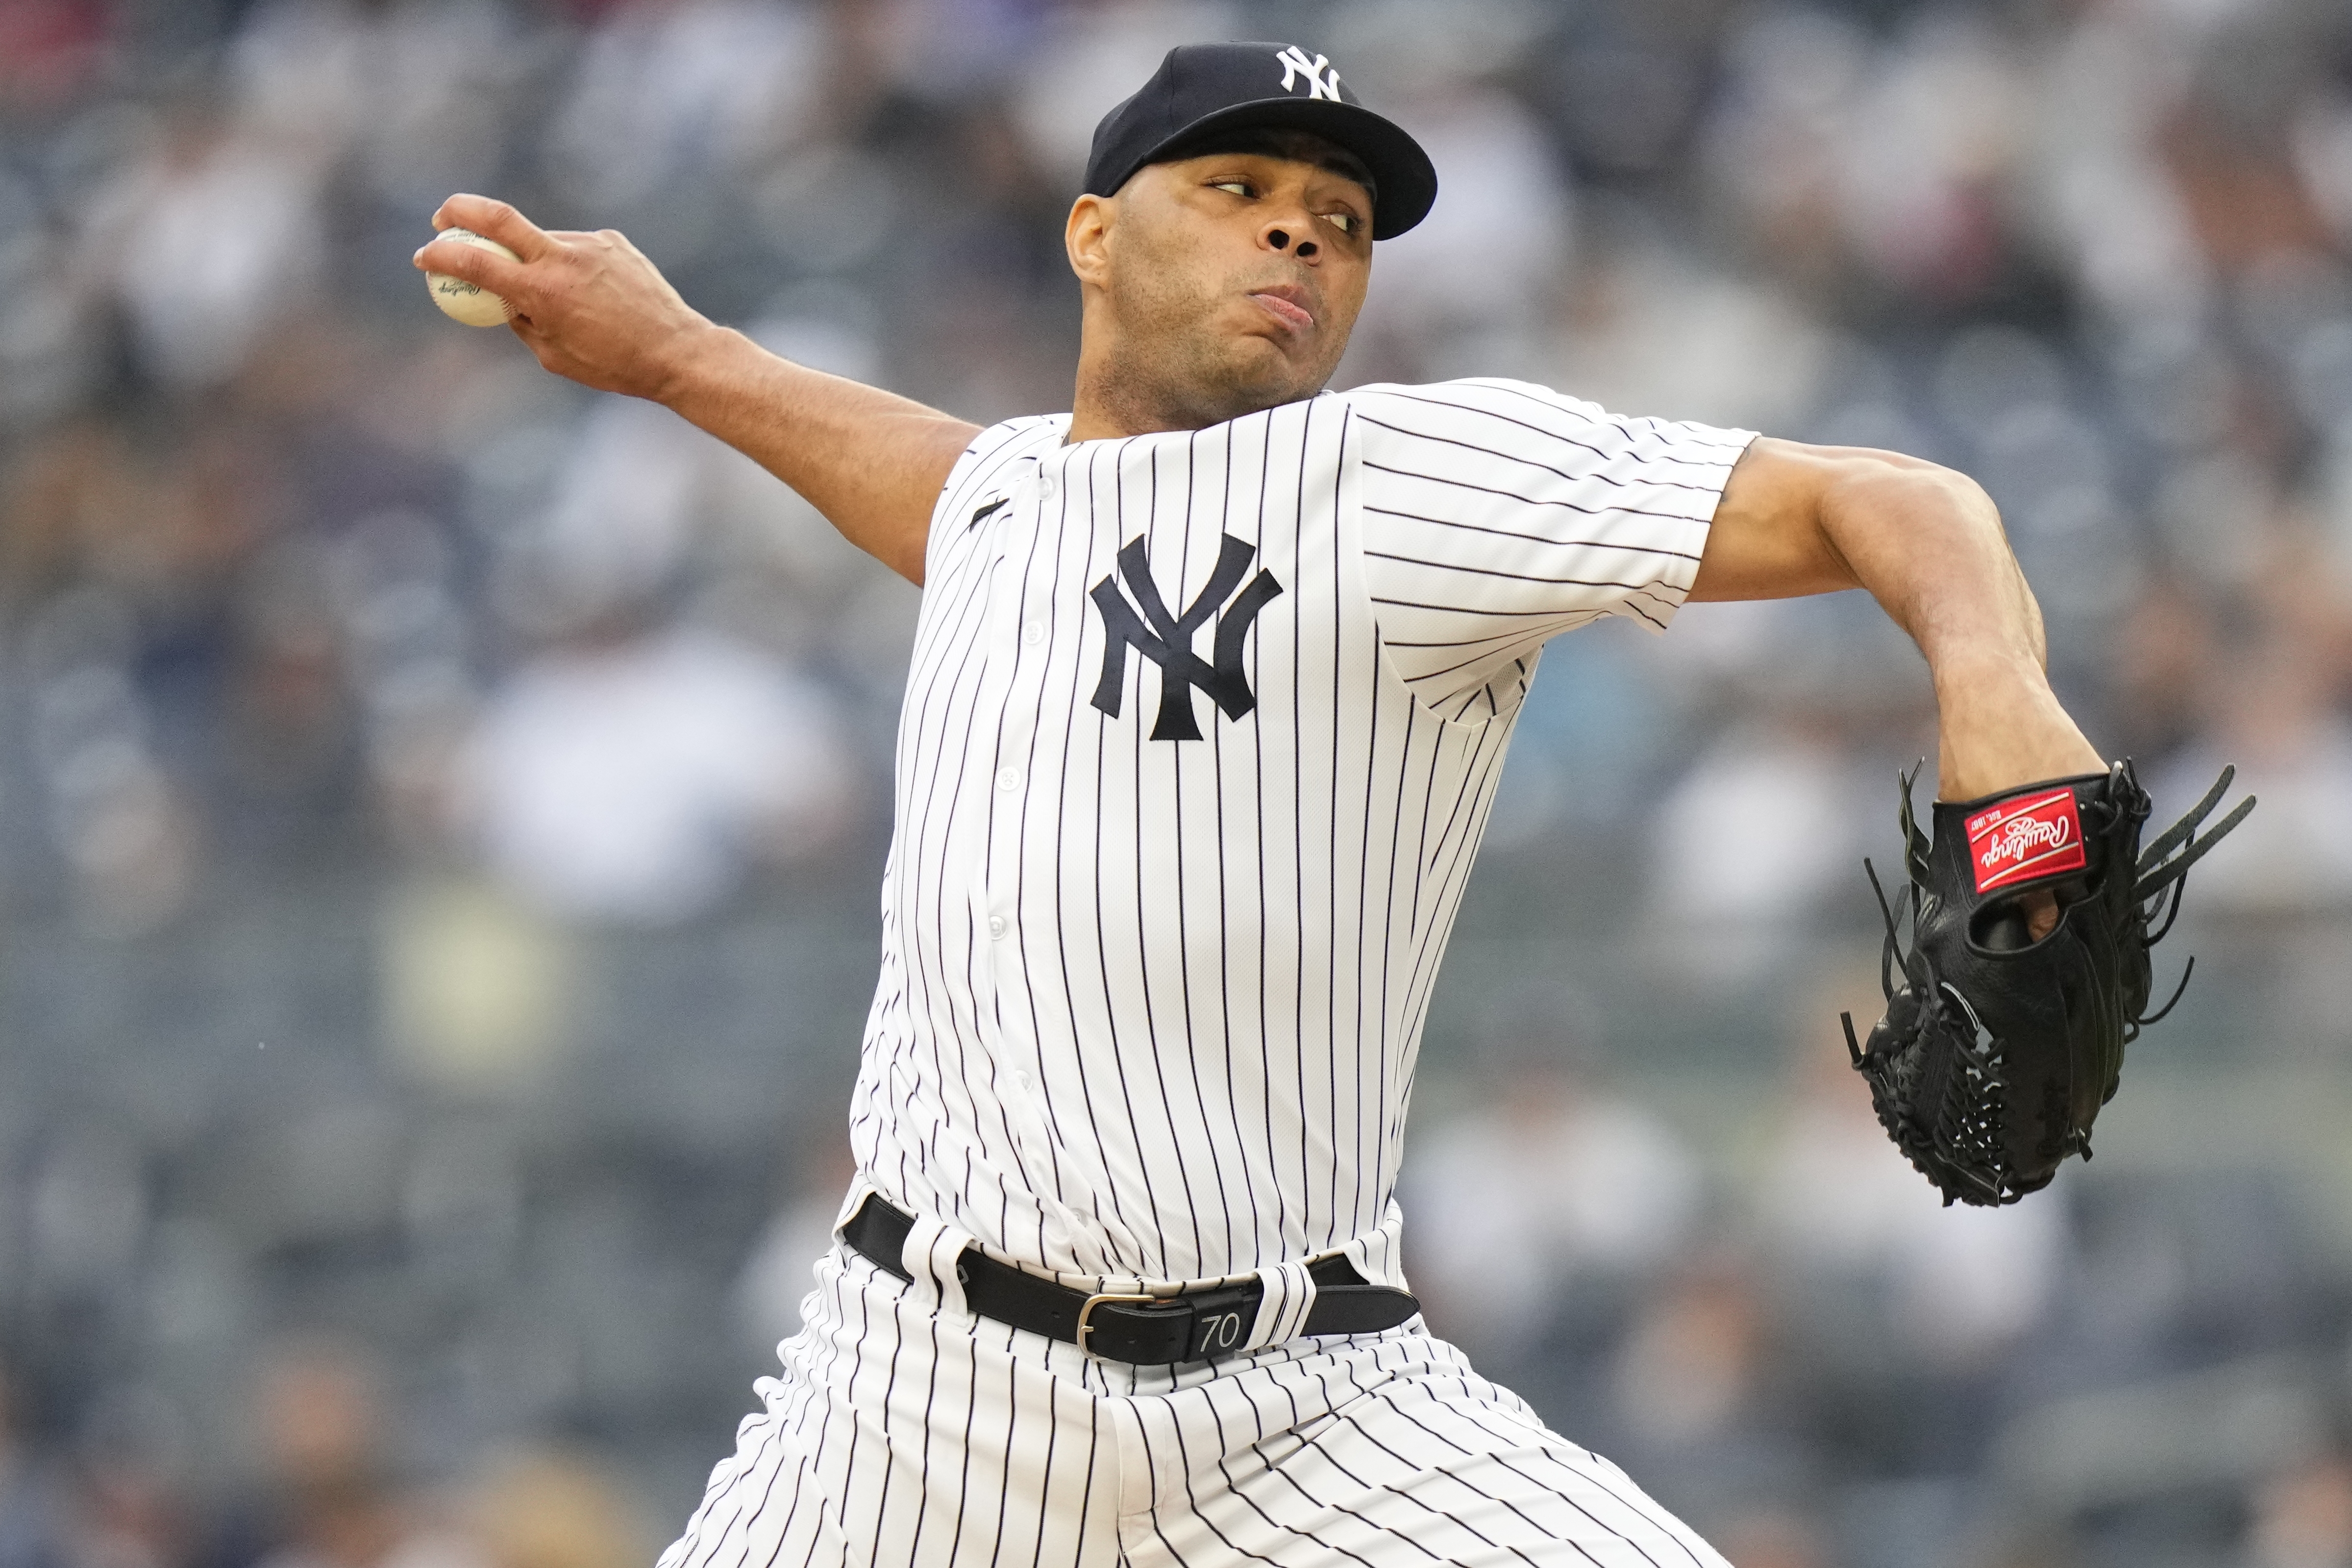 Yankees pitcher Cordero is suspended for the season